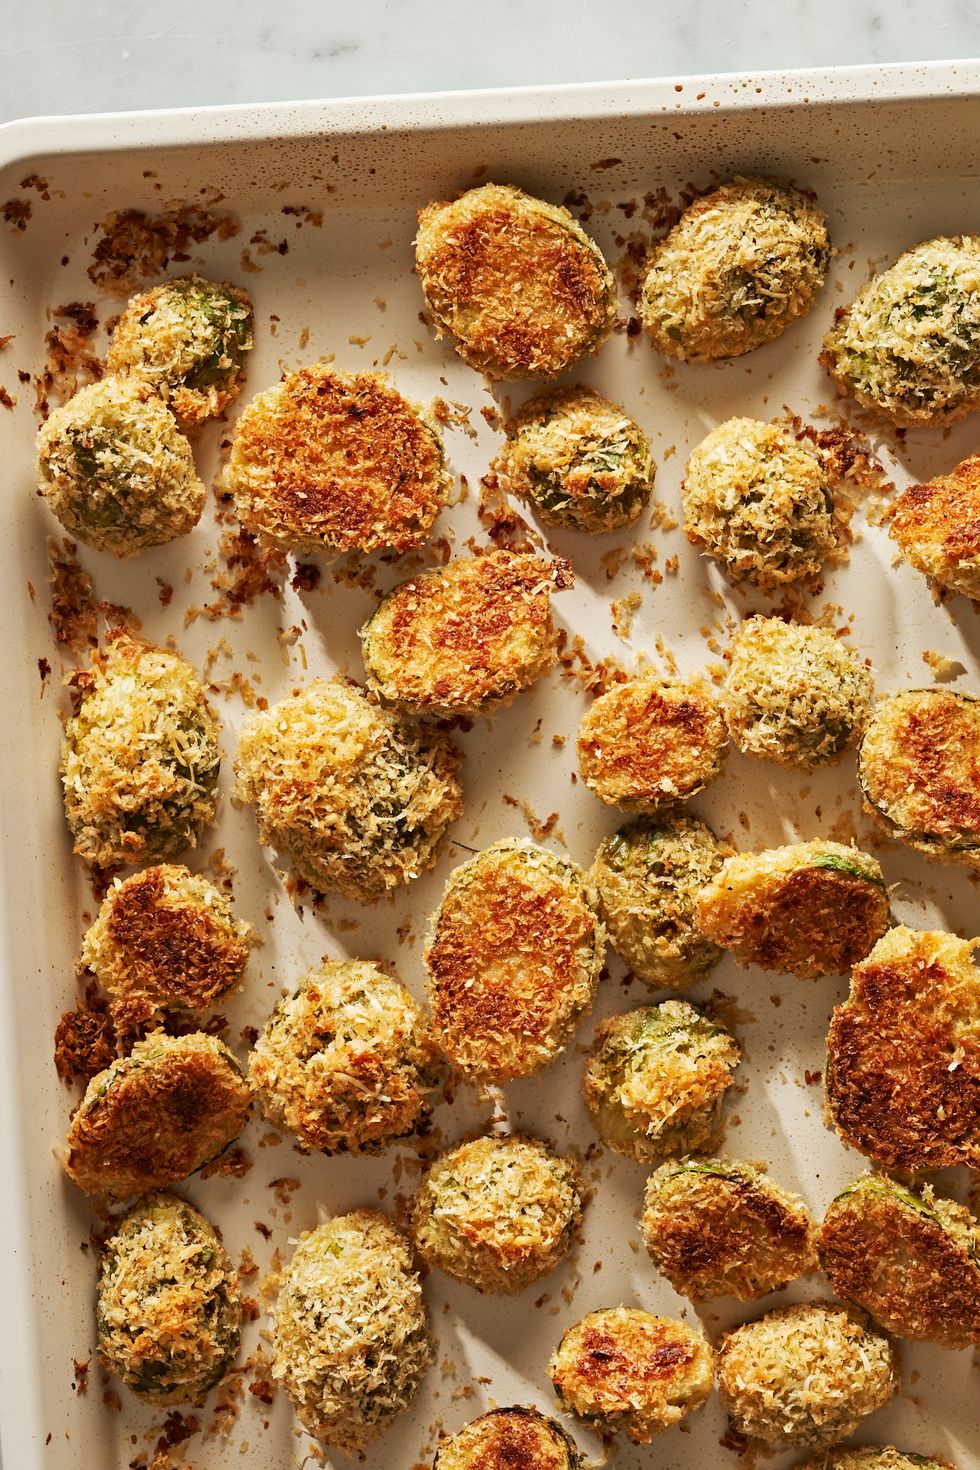 https://hips.hearstapps.com/hmg-prod/images/parmesan-roasted-brussels-sprouts3-1671199888.jpg?crop=0.9997727789138833xw:1xh;center,top&resize=980:*